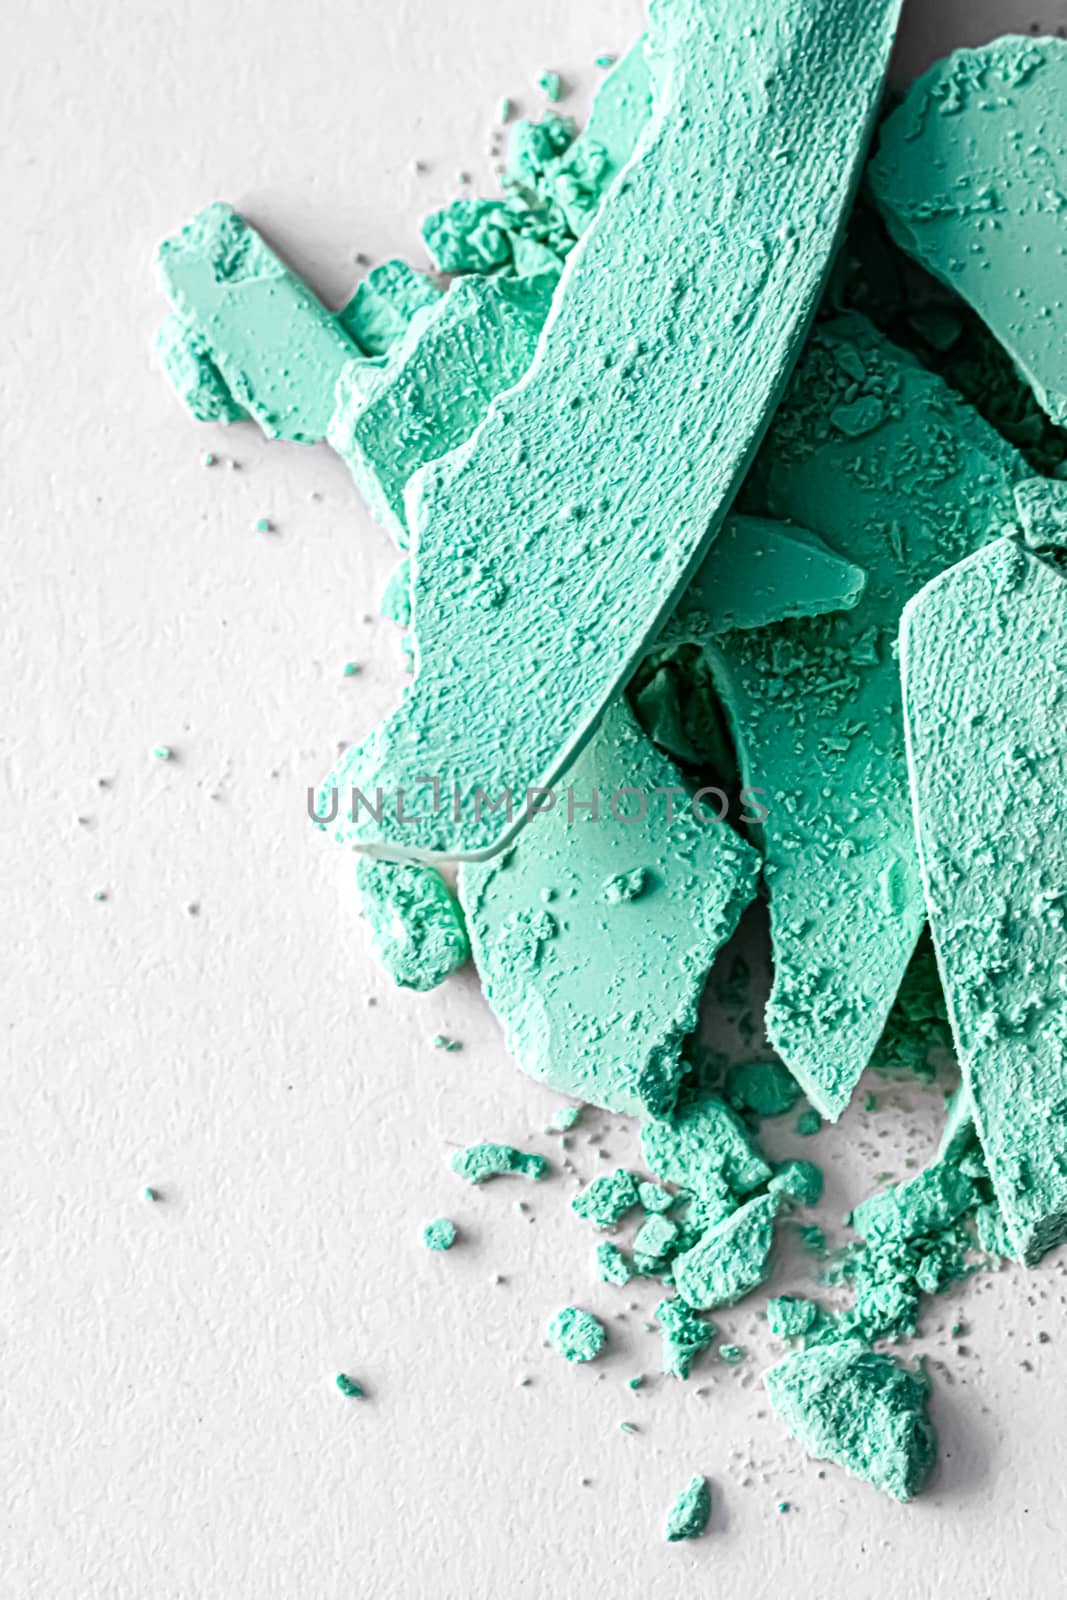 Mint eye shadow powder as makeup palette closeup isolated on white background, crushed cosmetics and beauty textures